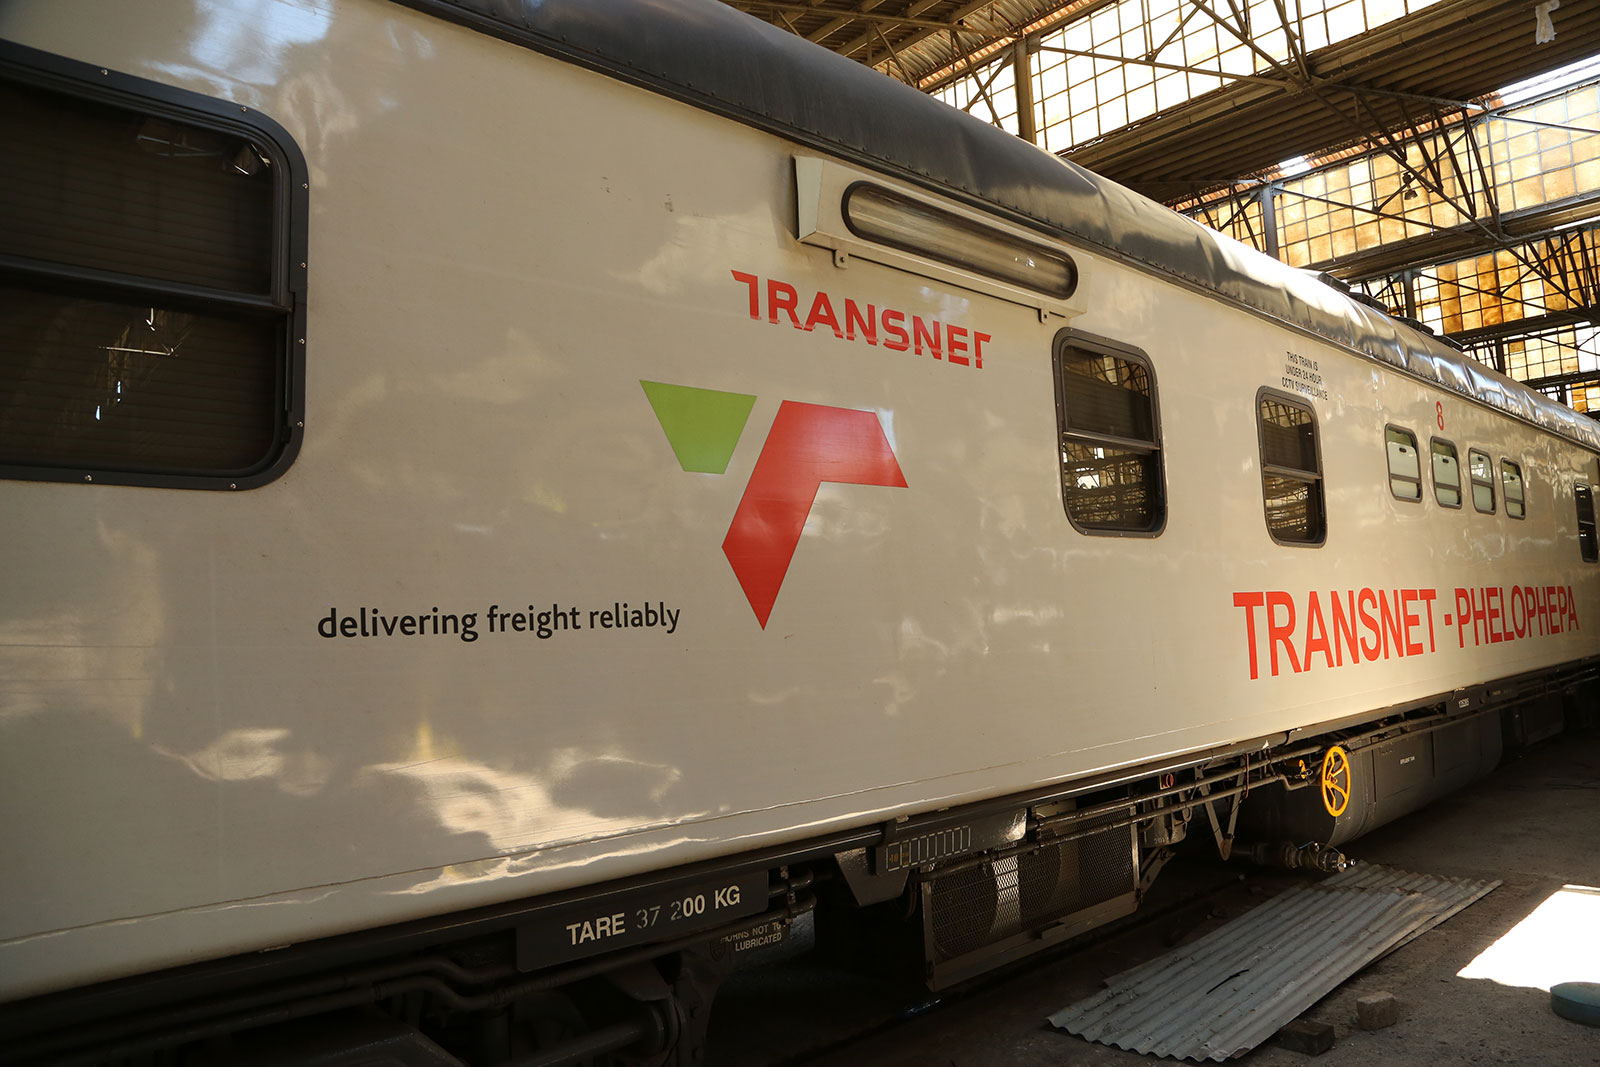 Transnet’s Phelophepa Health Care Train Comes to the Western Cape